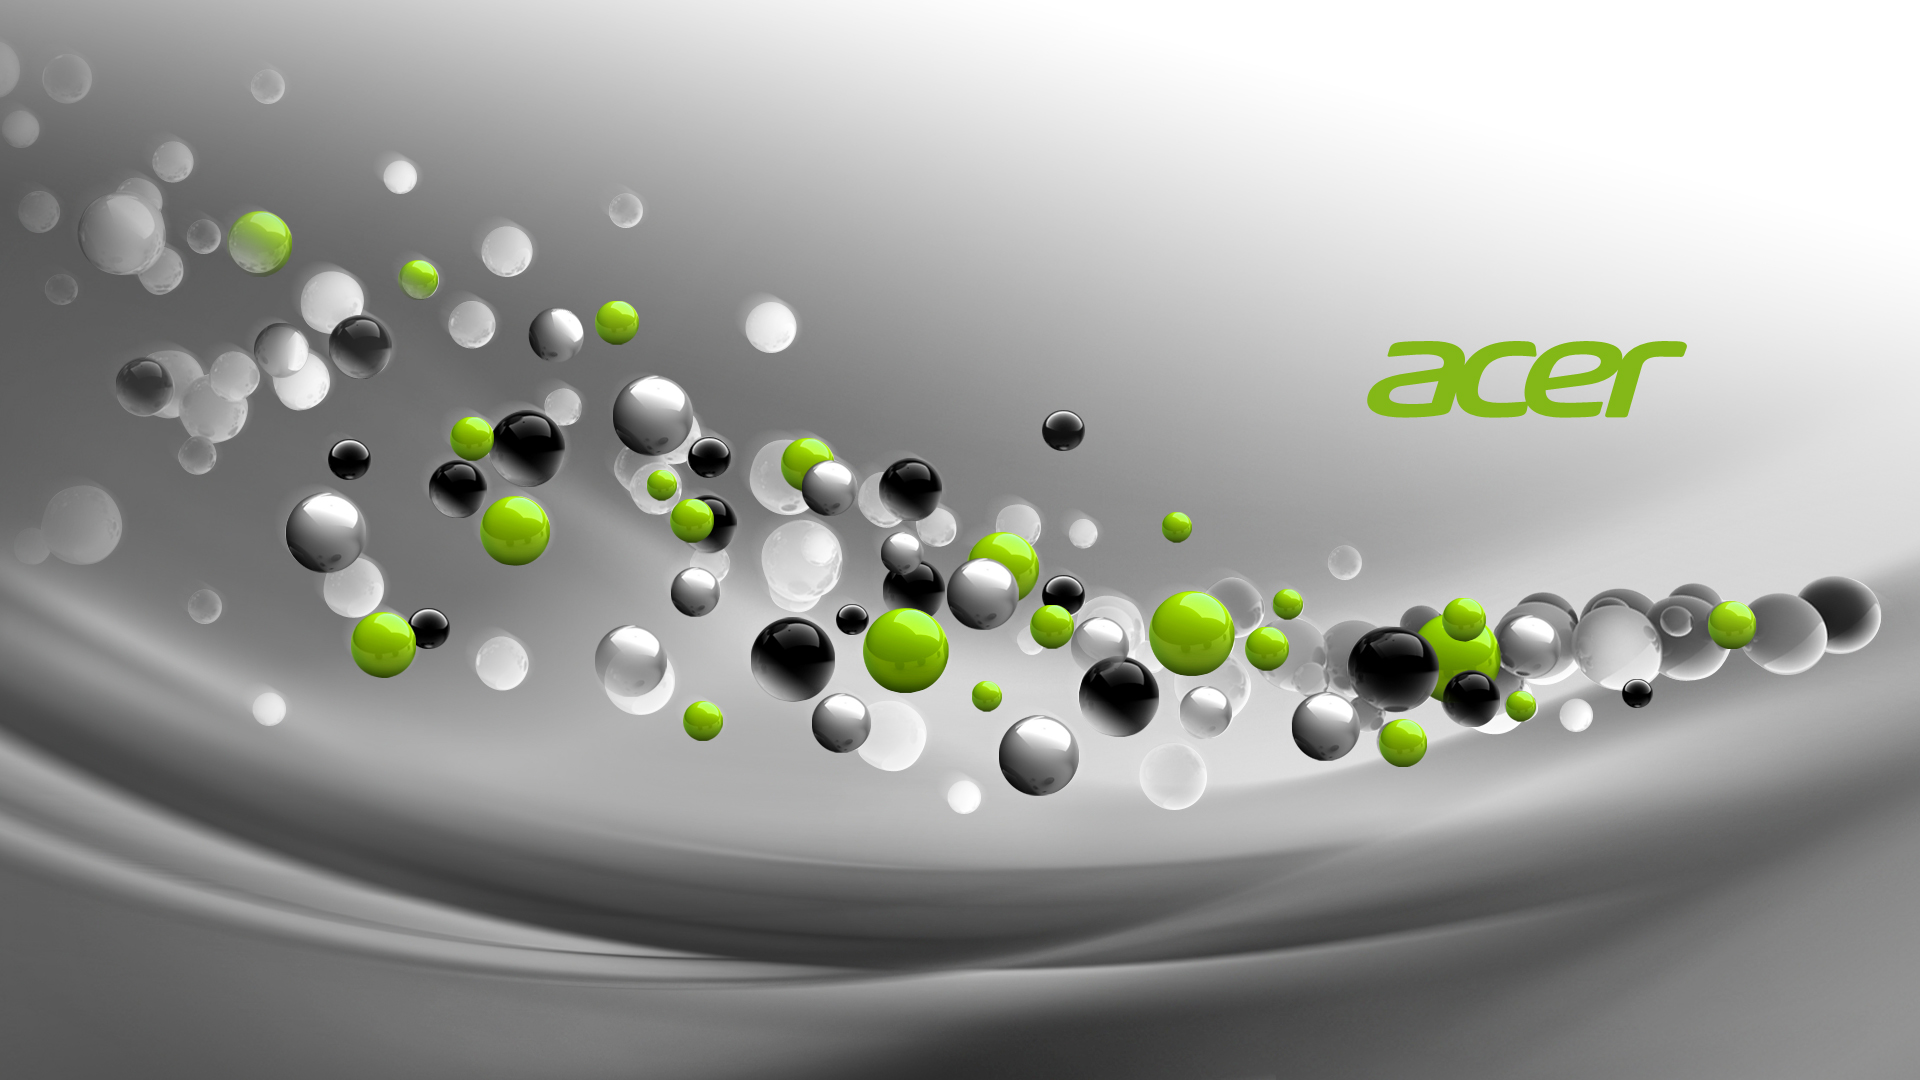 Acer laptop themes for windows 8 free download mercedes-benz navigation free download